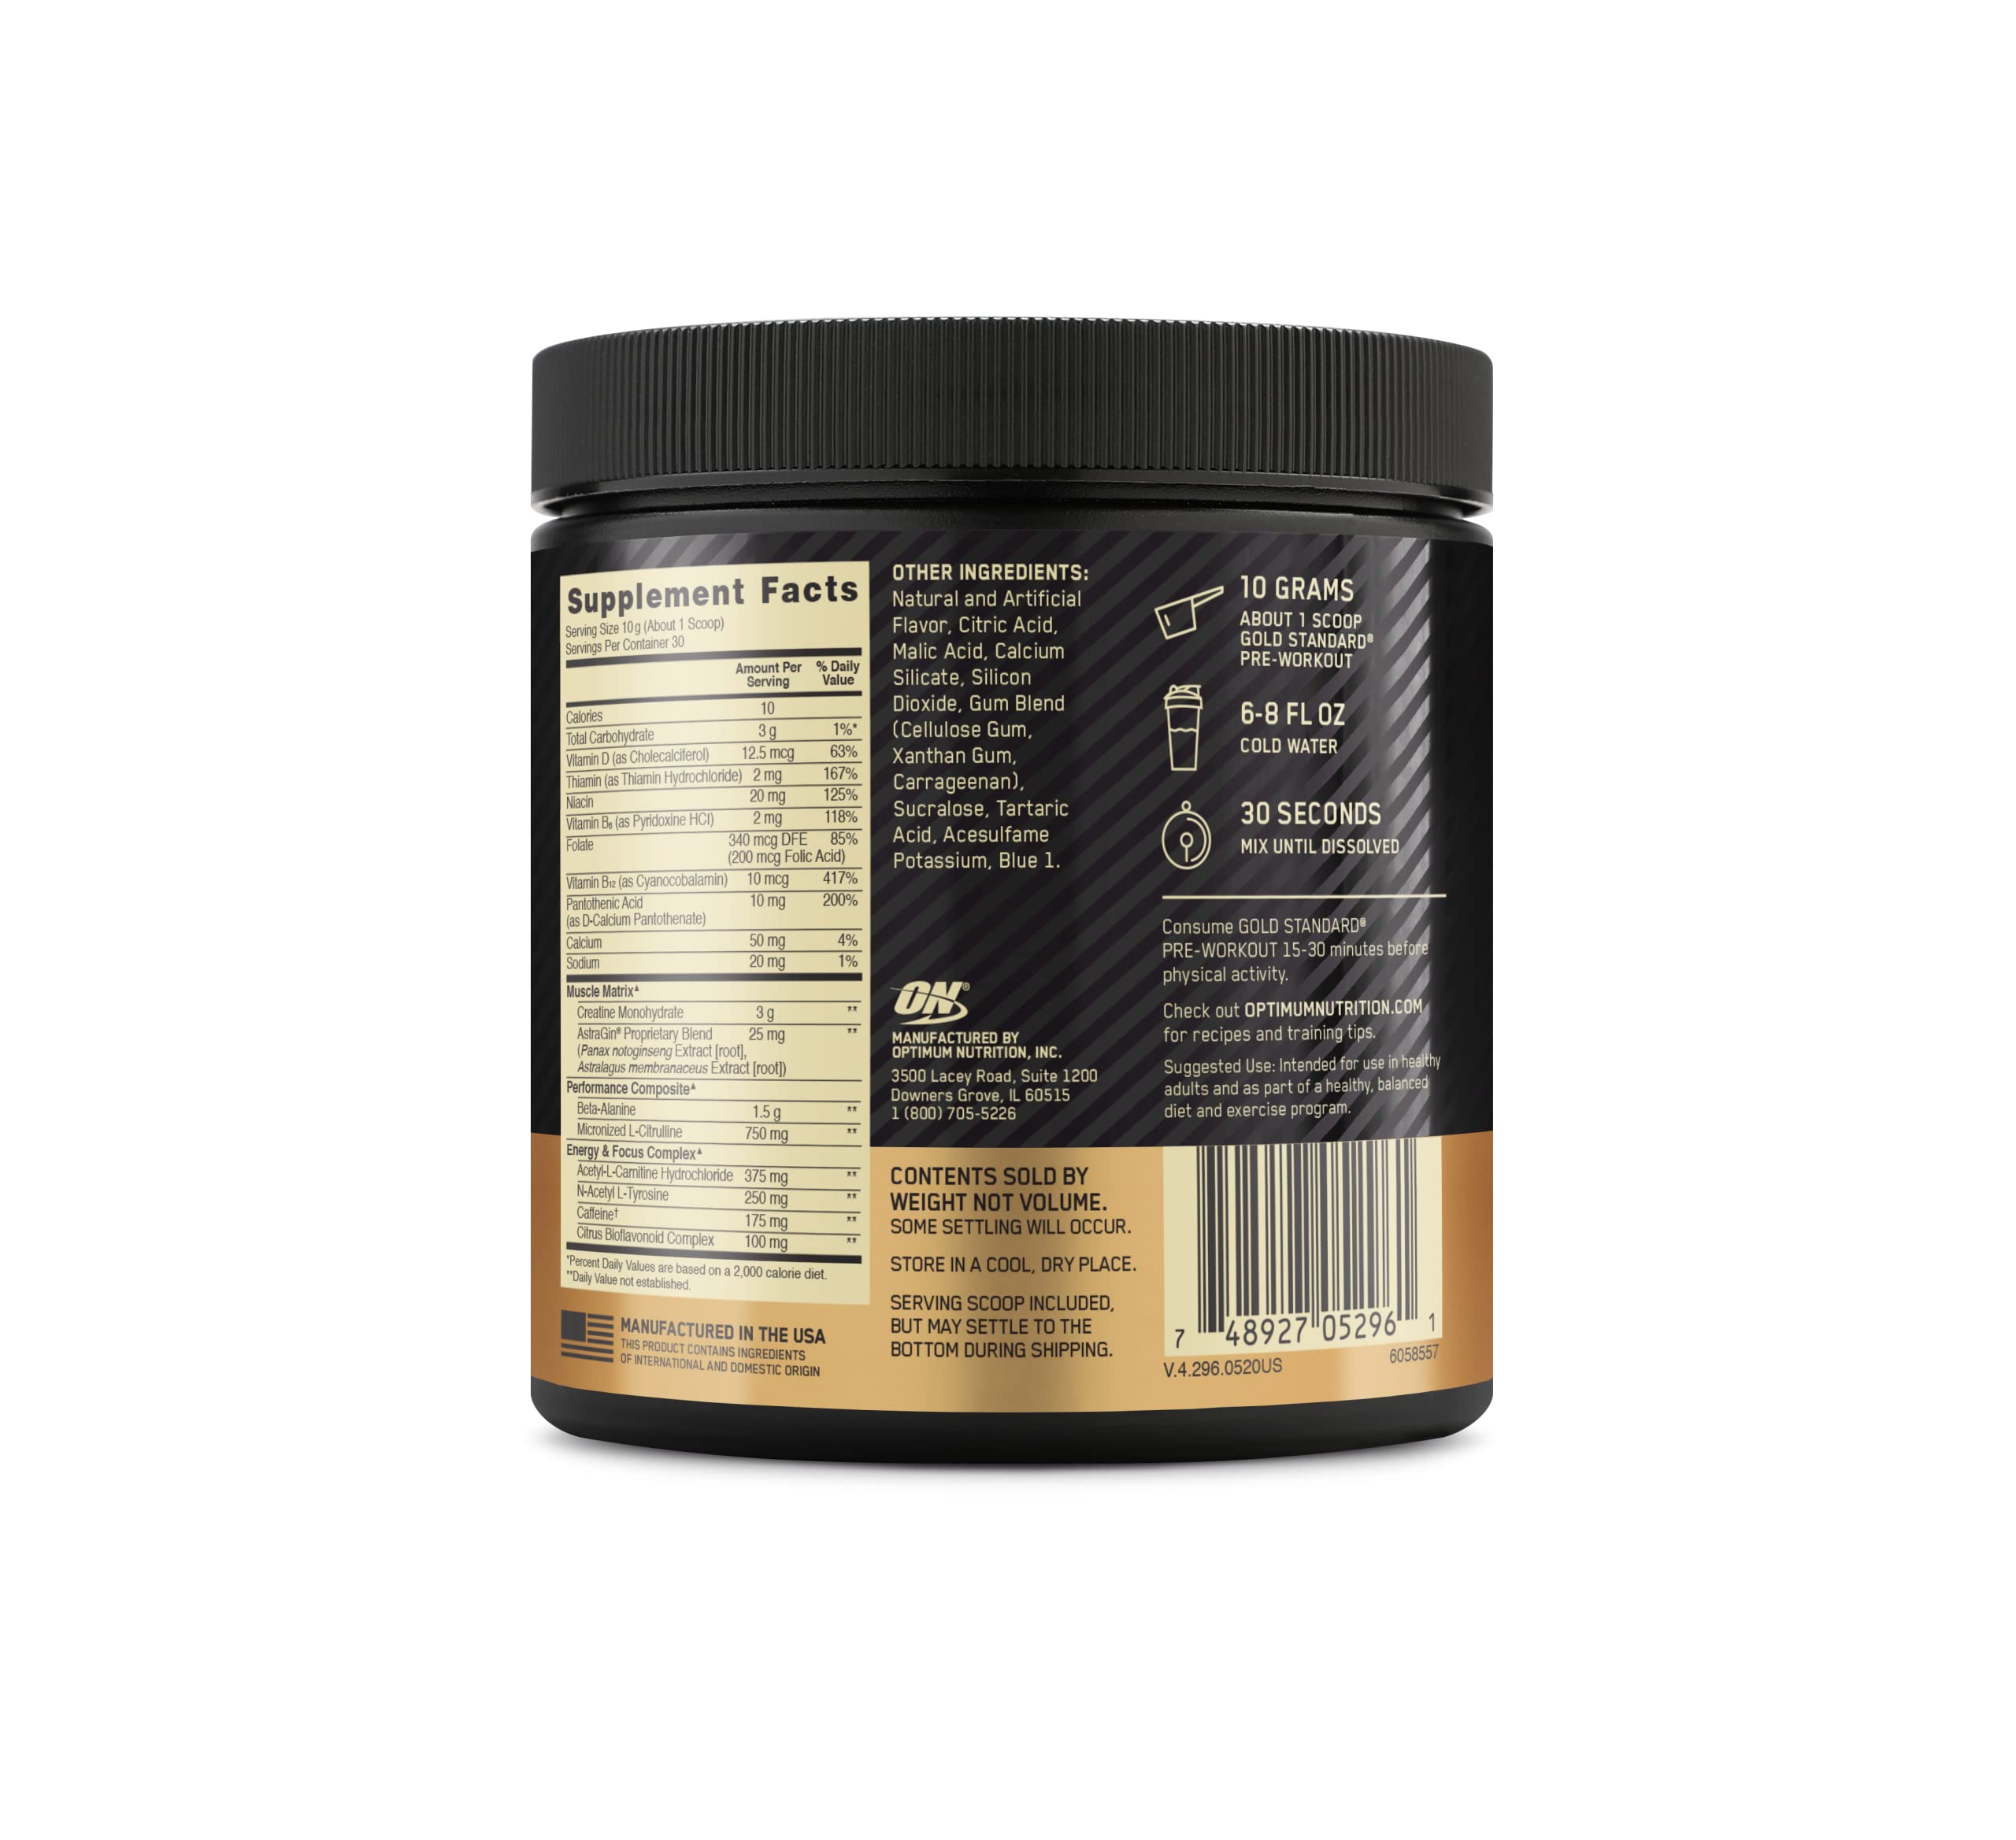 Optimum Nutrition Gold Standard Pre-Workout, Vitamin D for Immune Support, with Creatine, Beta-Alanine, and Caffeine for Energy, Keto Friendly, Blueberry Lemonade, 30 Servings (Packaging May Vary)